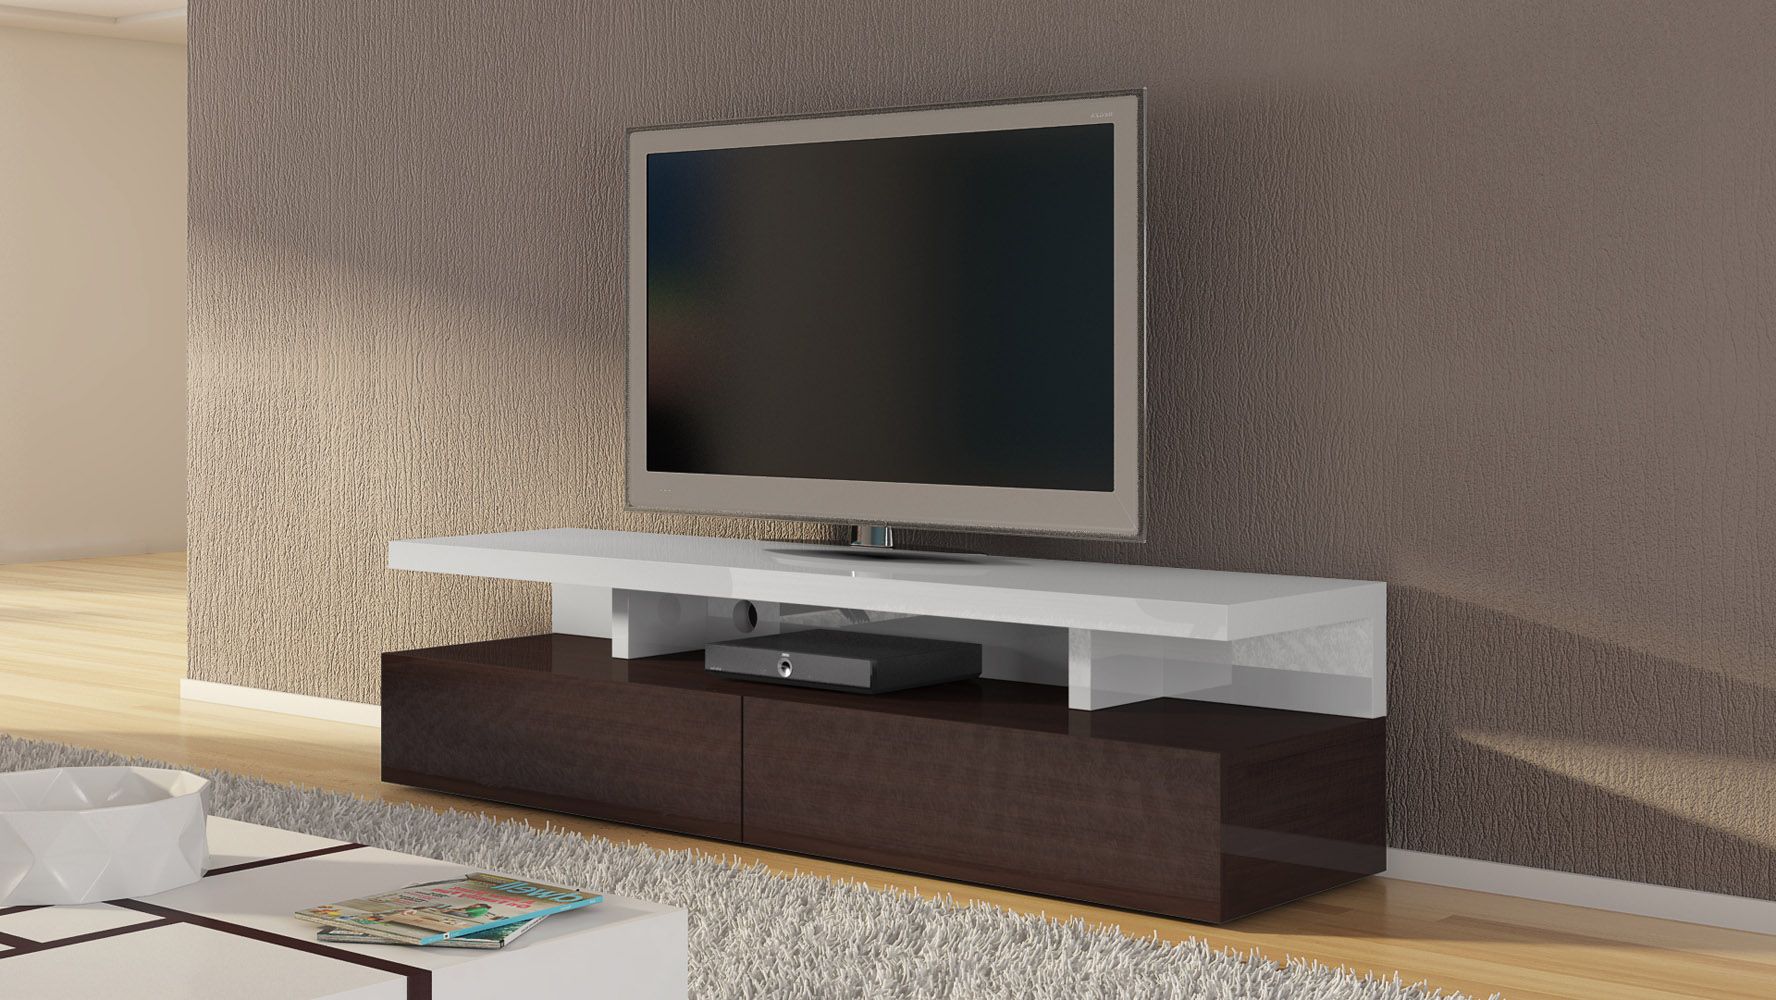 Mcintosh 71 Inch Tv Stand In White High Gloss And Ebony Pertaining To Tv Stands With 2 Open Shelves 2 Drawers High Gloss Tv Unis (Gallery 3 of 20)